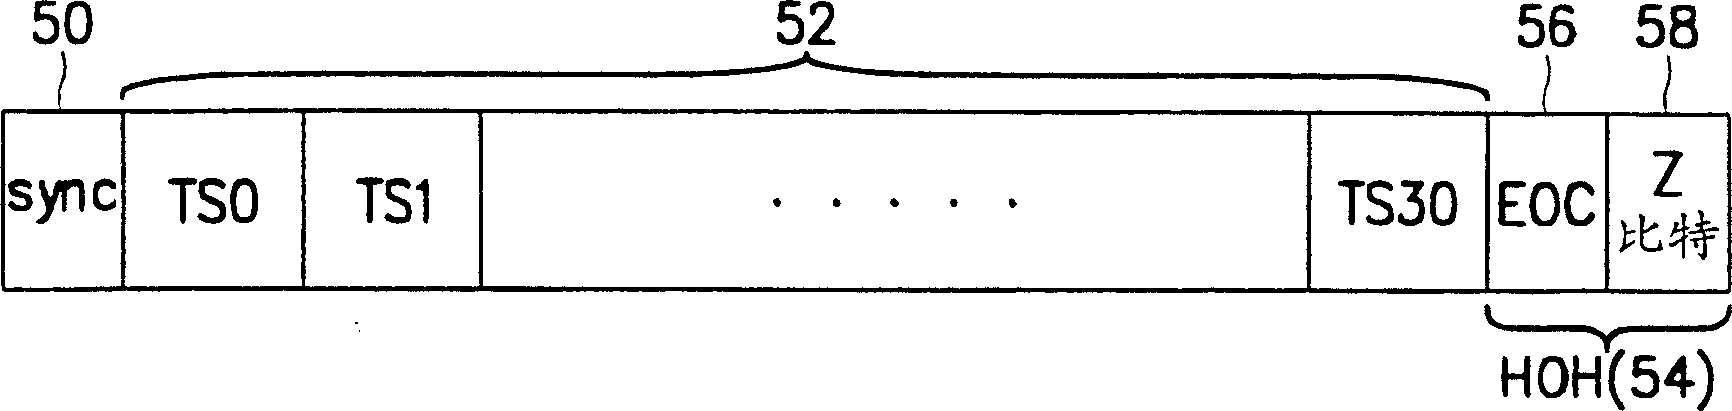 Method for supplying phonetic service of high speed data business